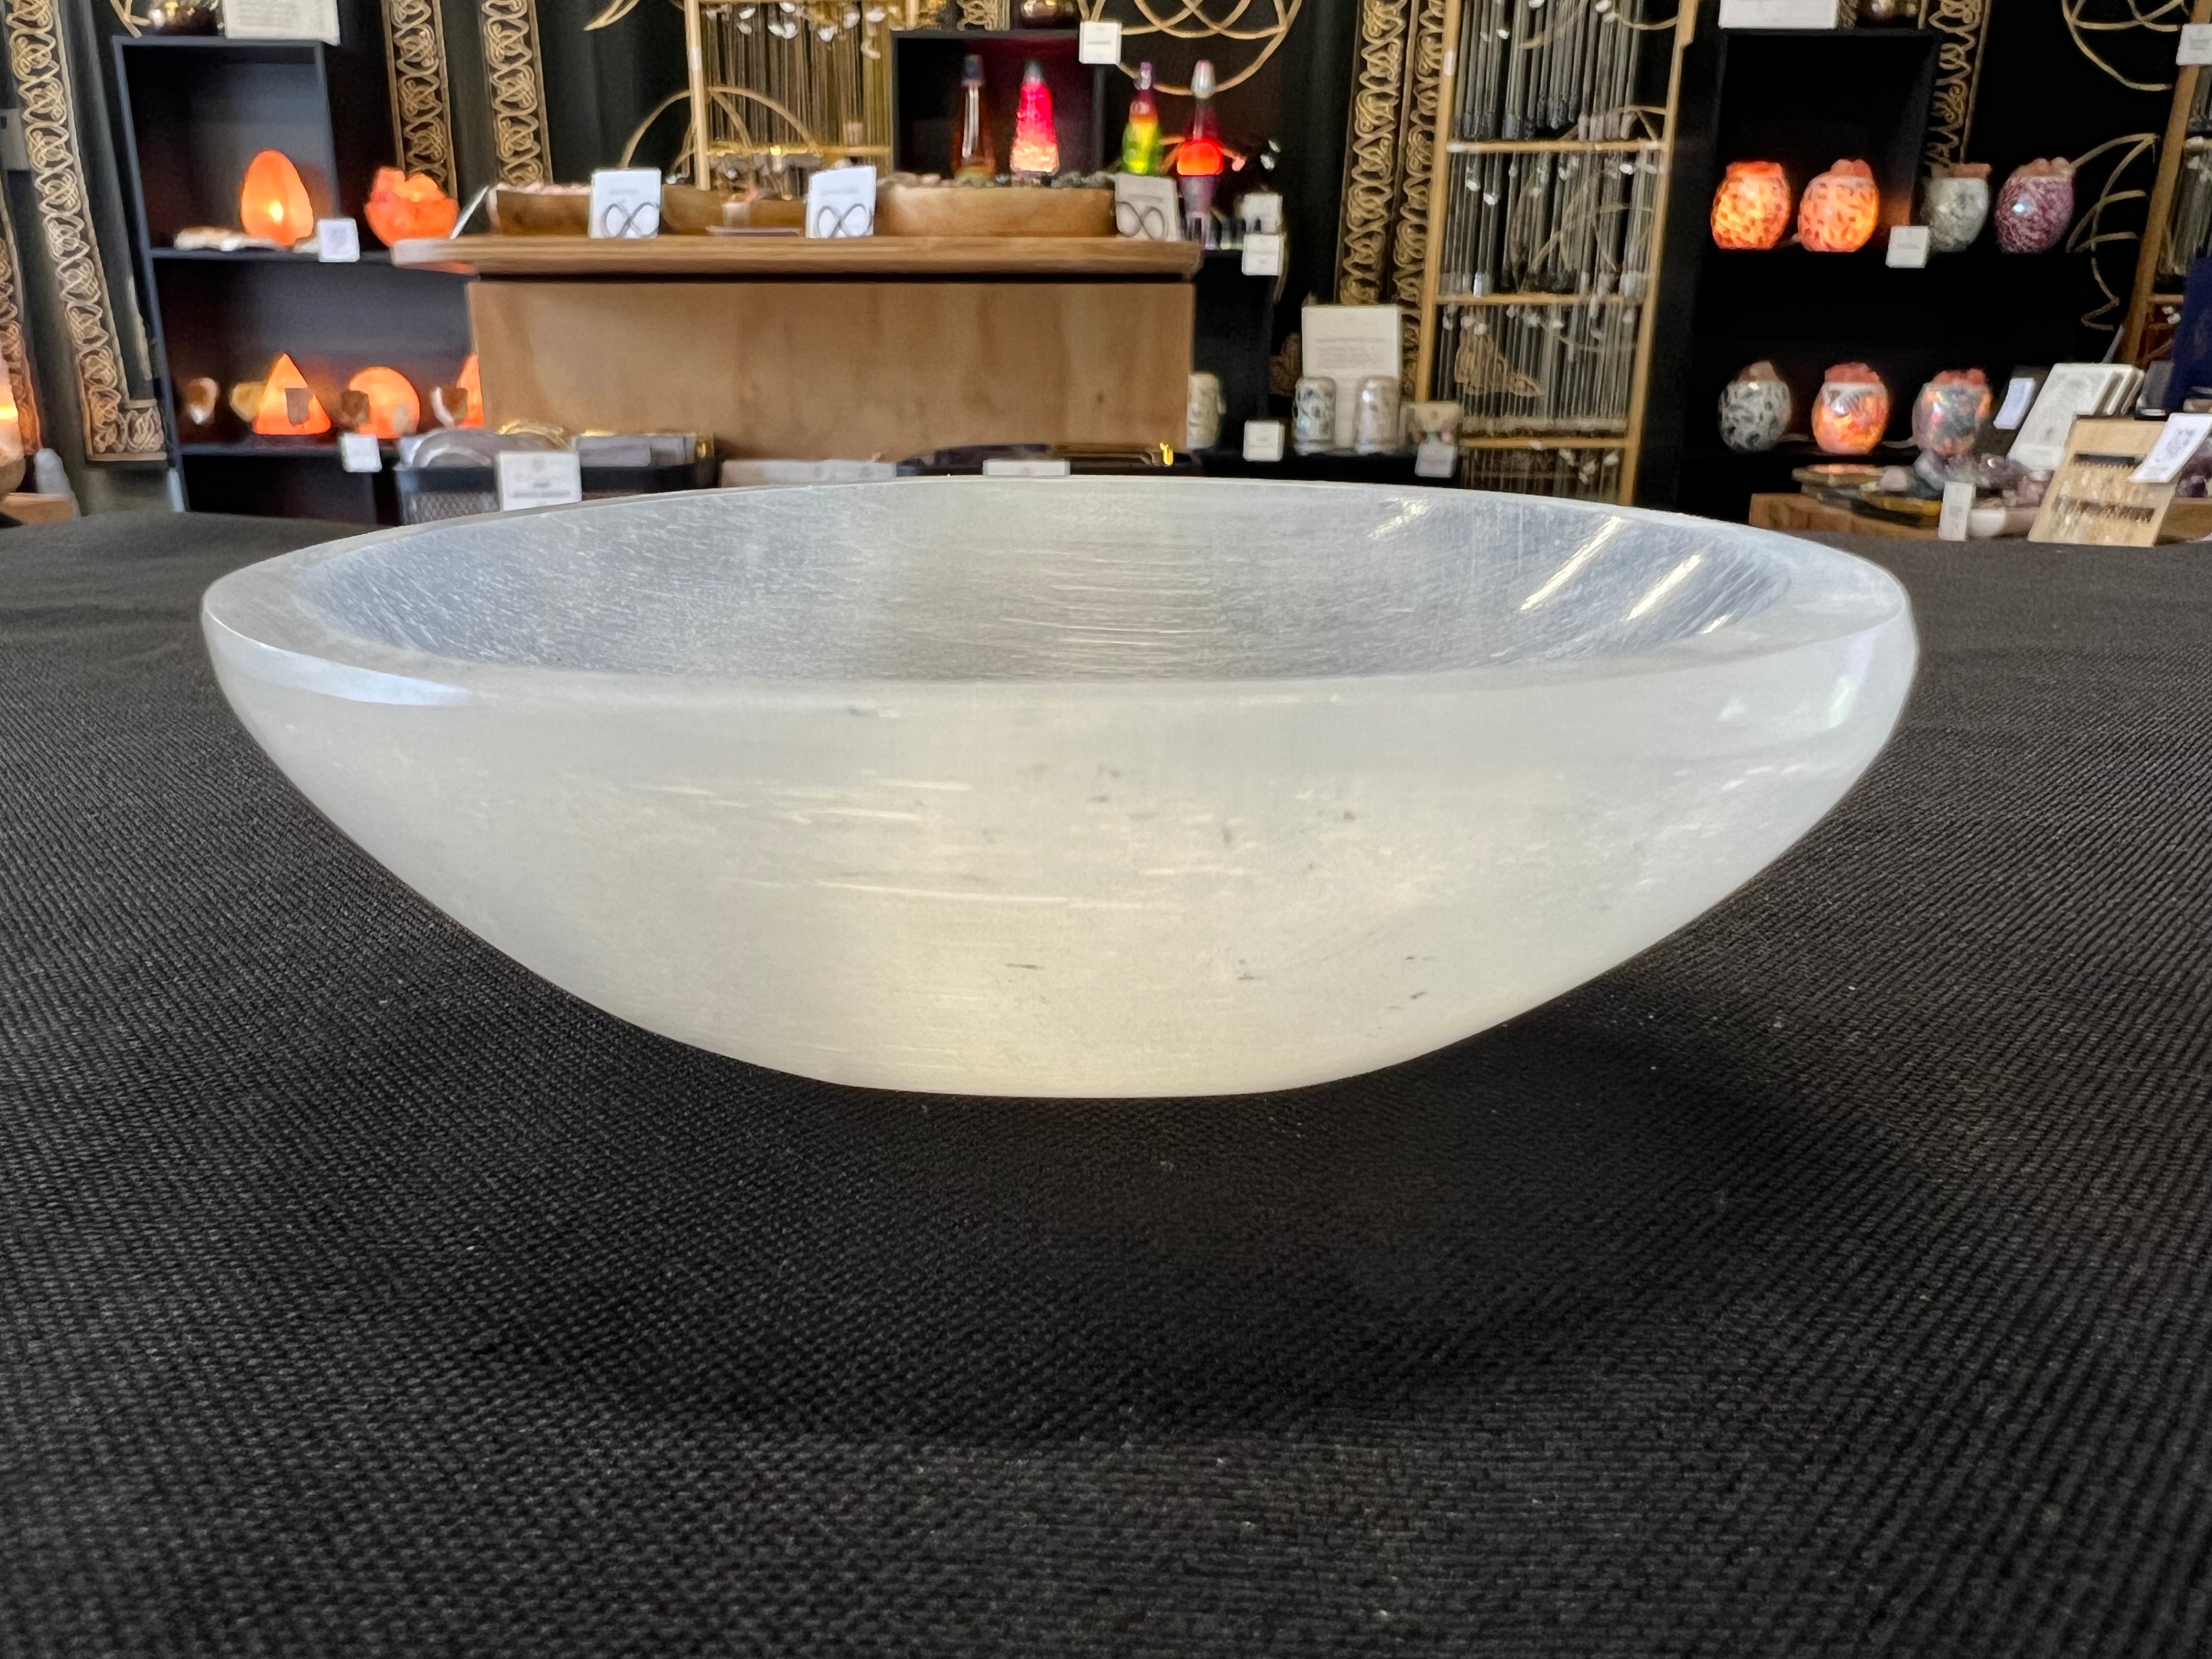 Oval Selenite Charging Display Bowl Crystals Jewelry Dish Holder 9cm